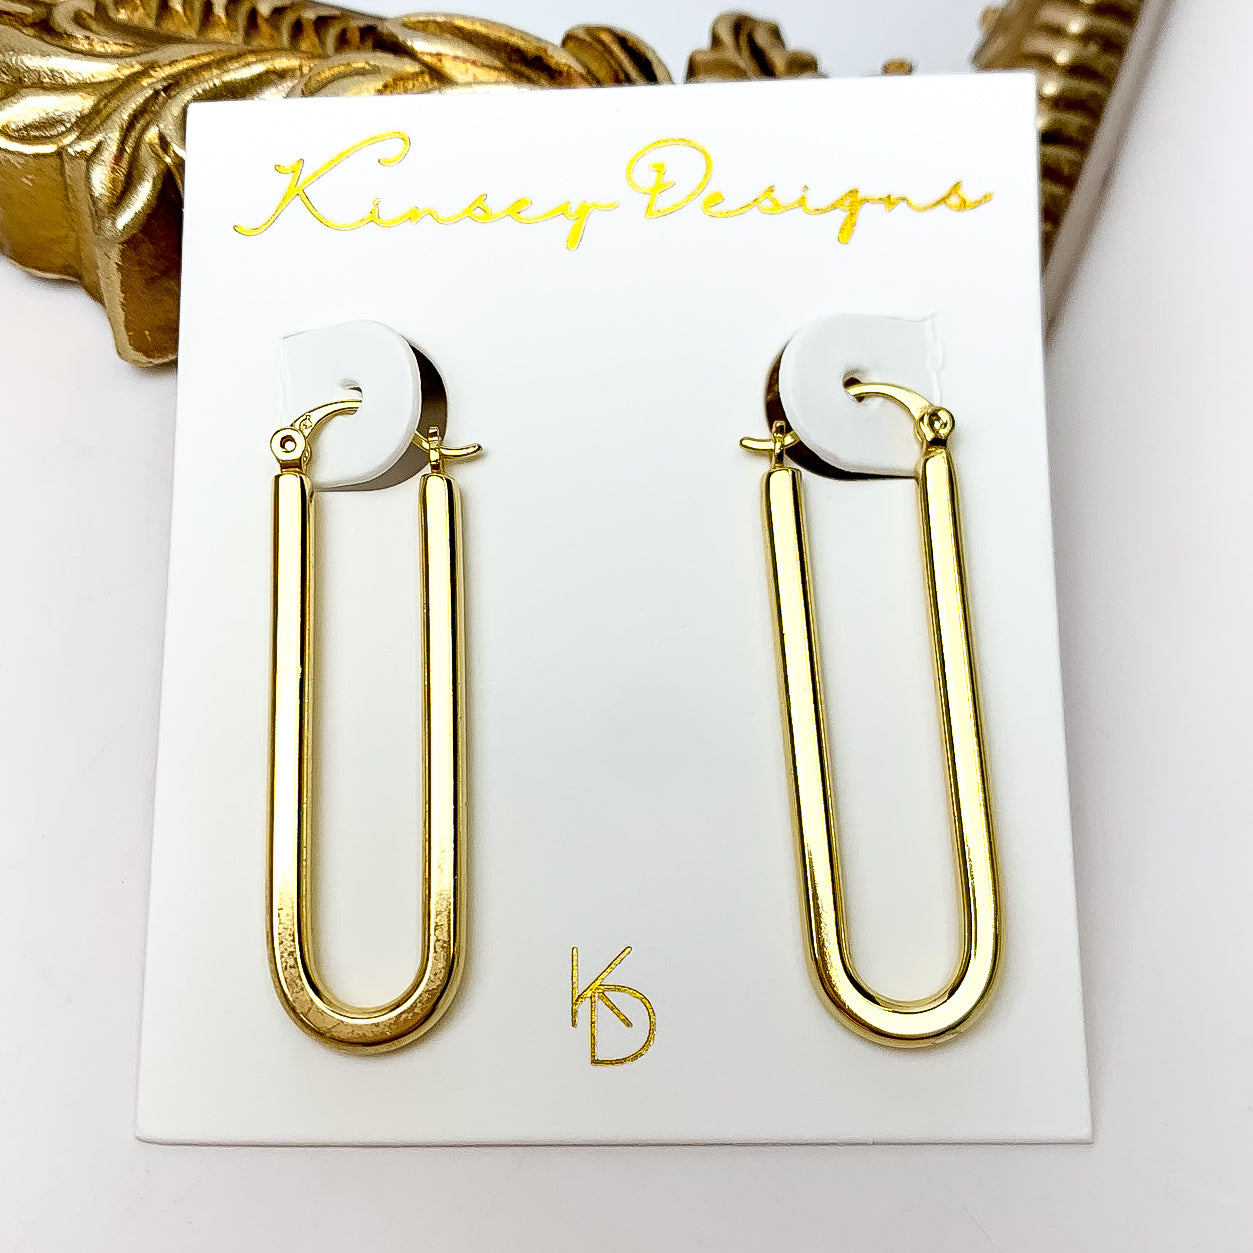 Kinsey Designs | Tate Hoop earrings - Giddy Up Glamour Boutique